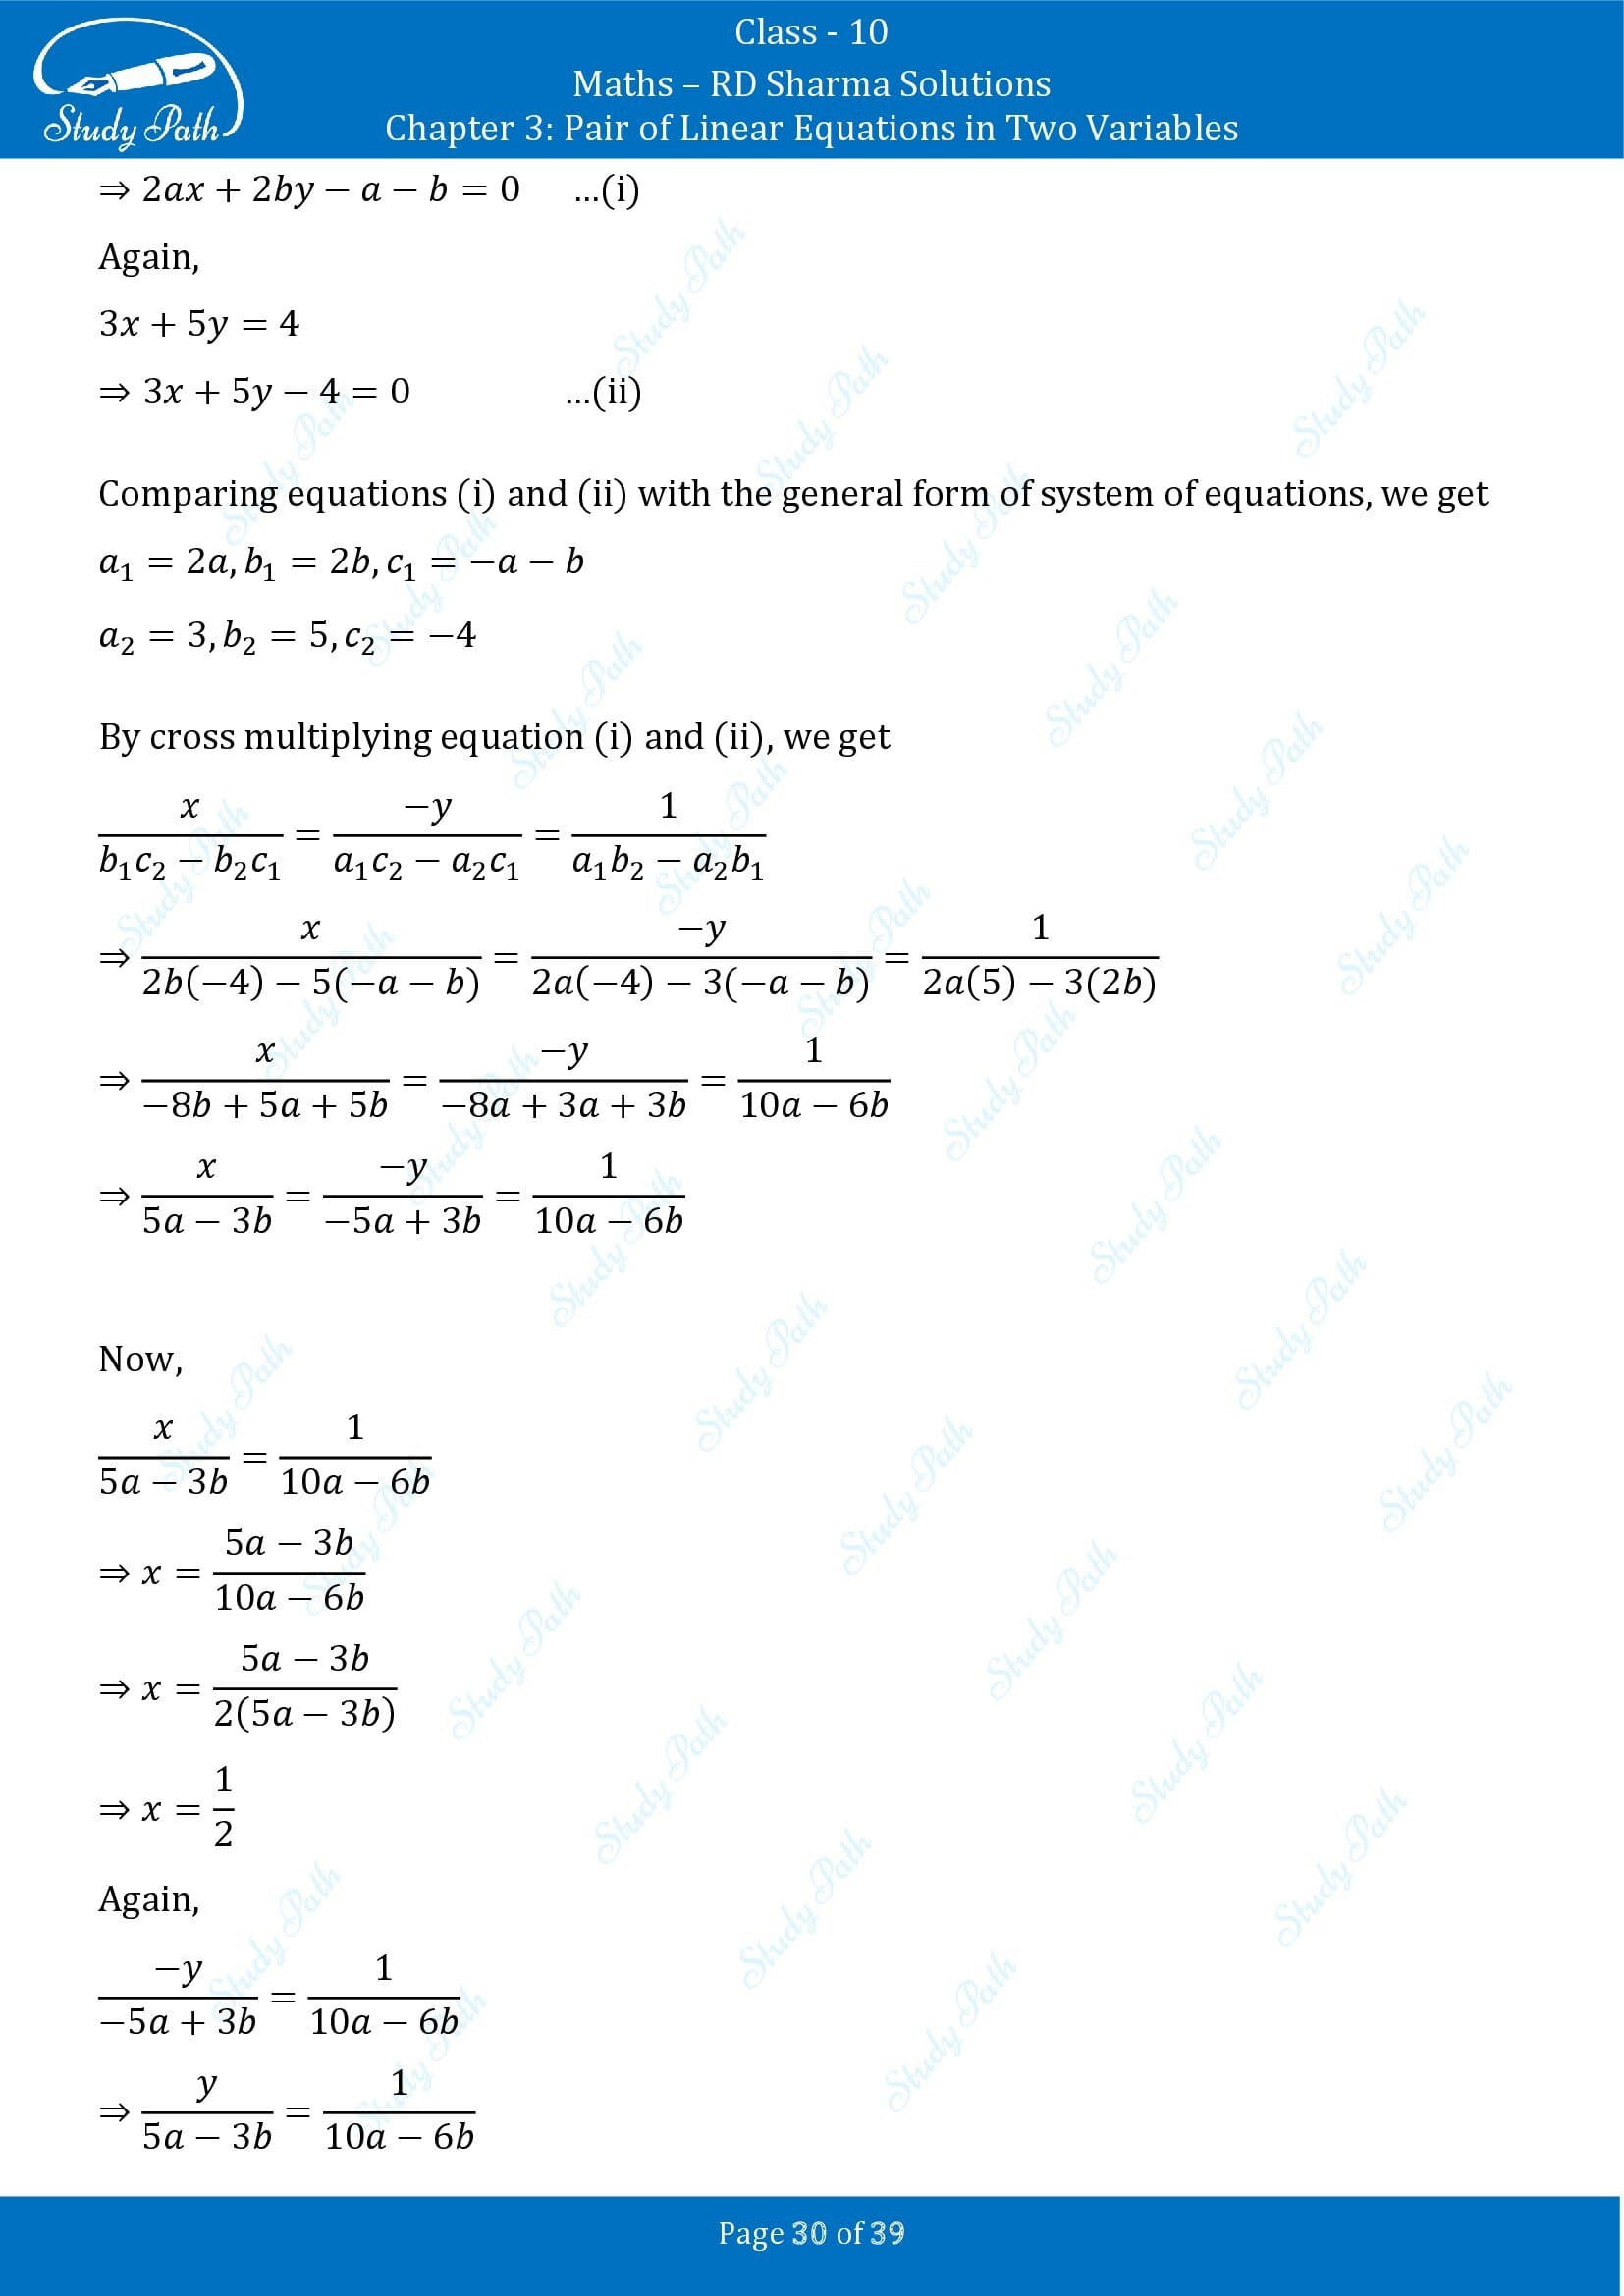 RD Sharma Solutions Class 10 Chapter 3 Pair of Linear Equations in Two Variables Exercise 3.4 00030